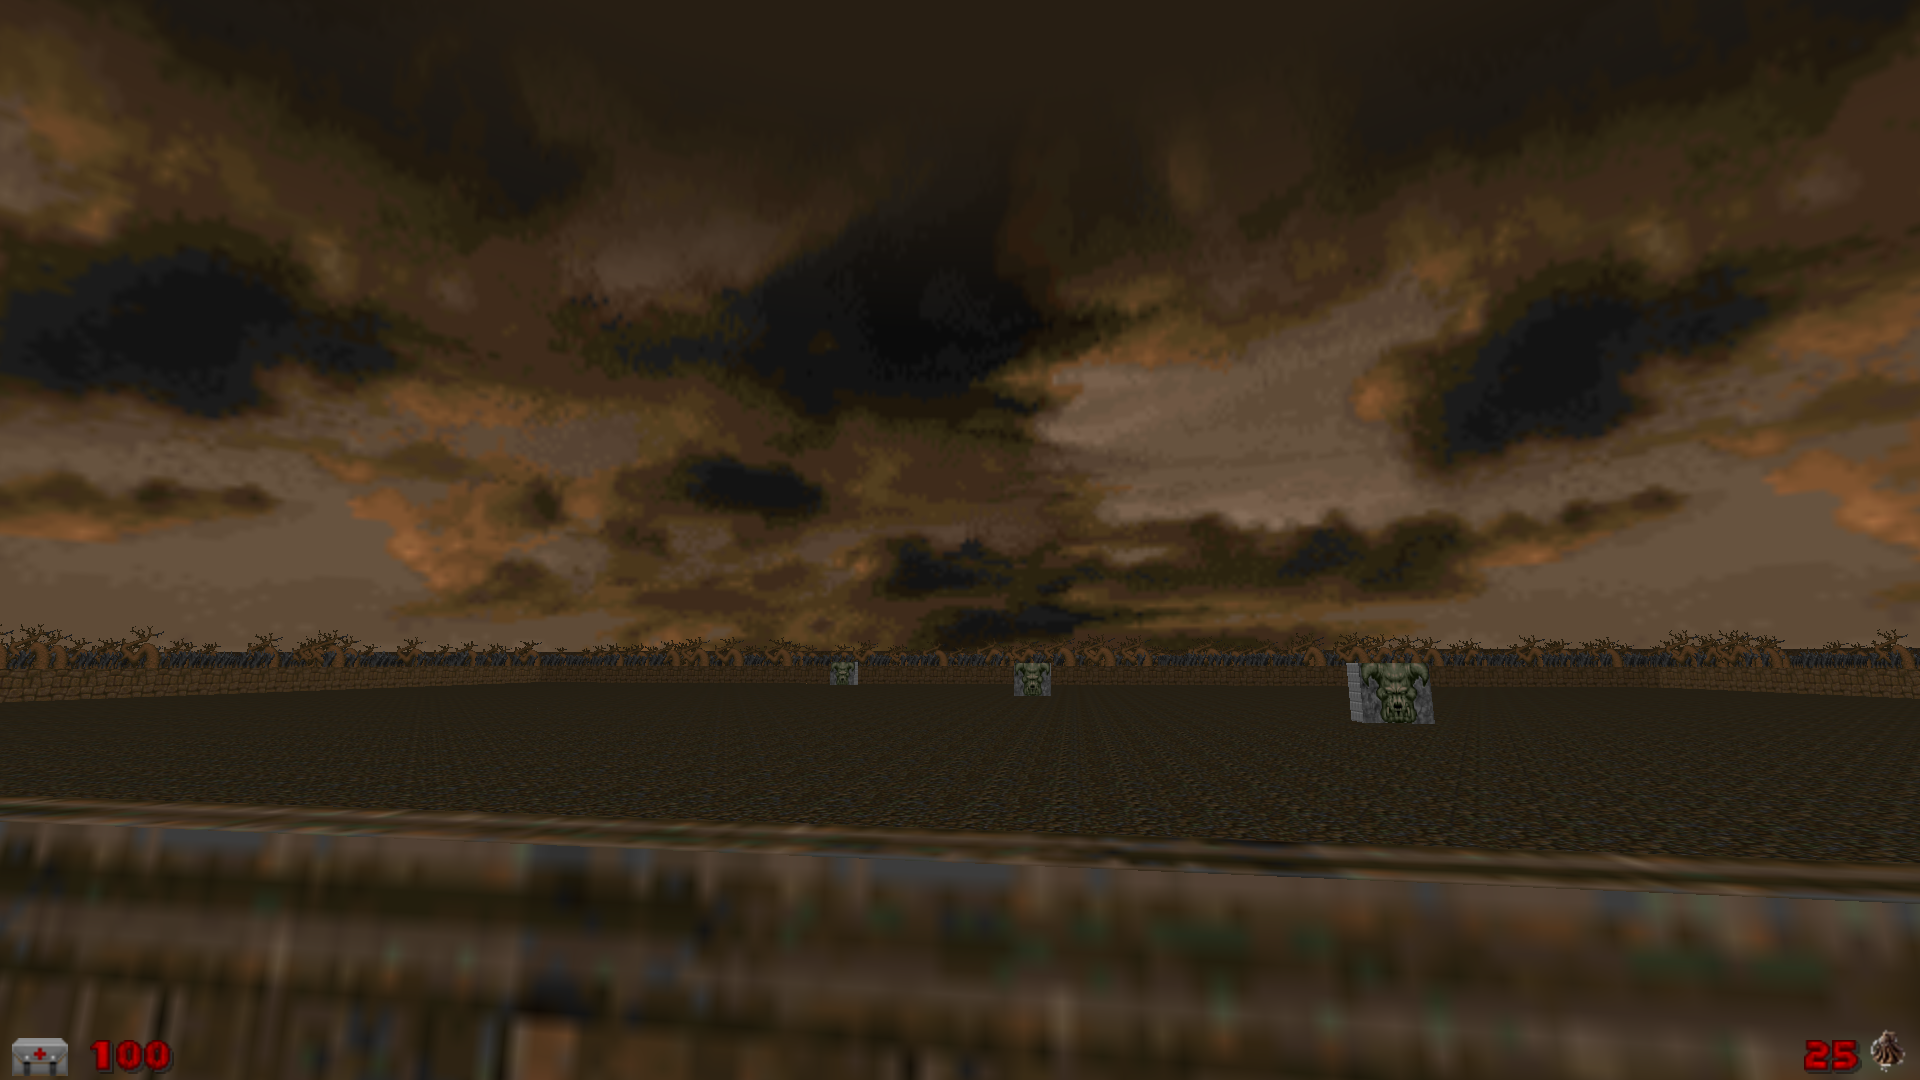 Skyboxes!